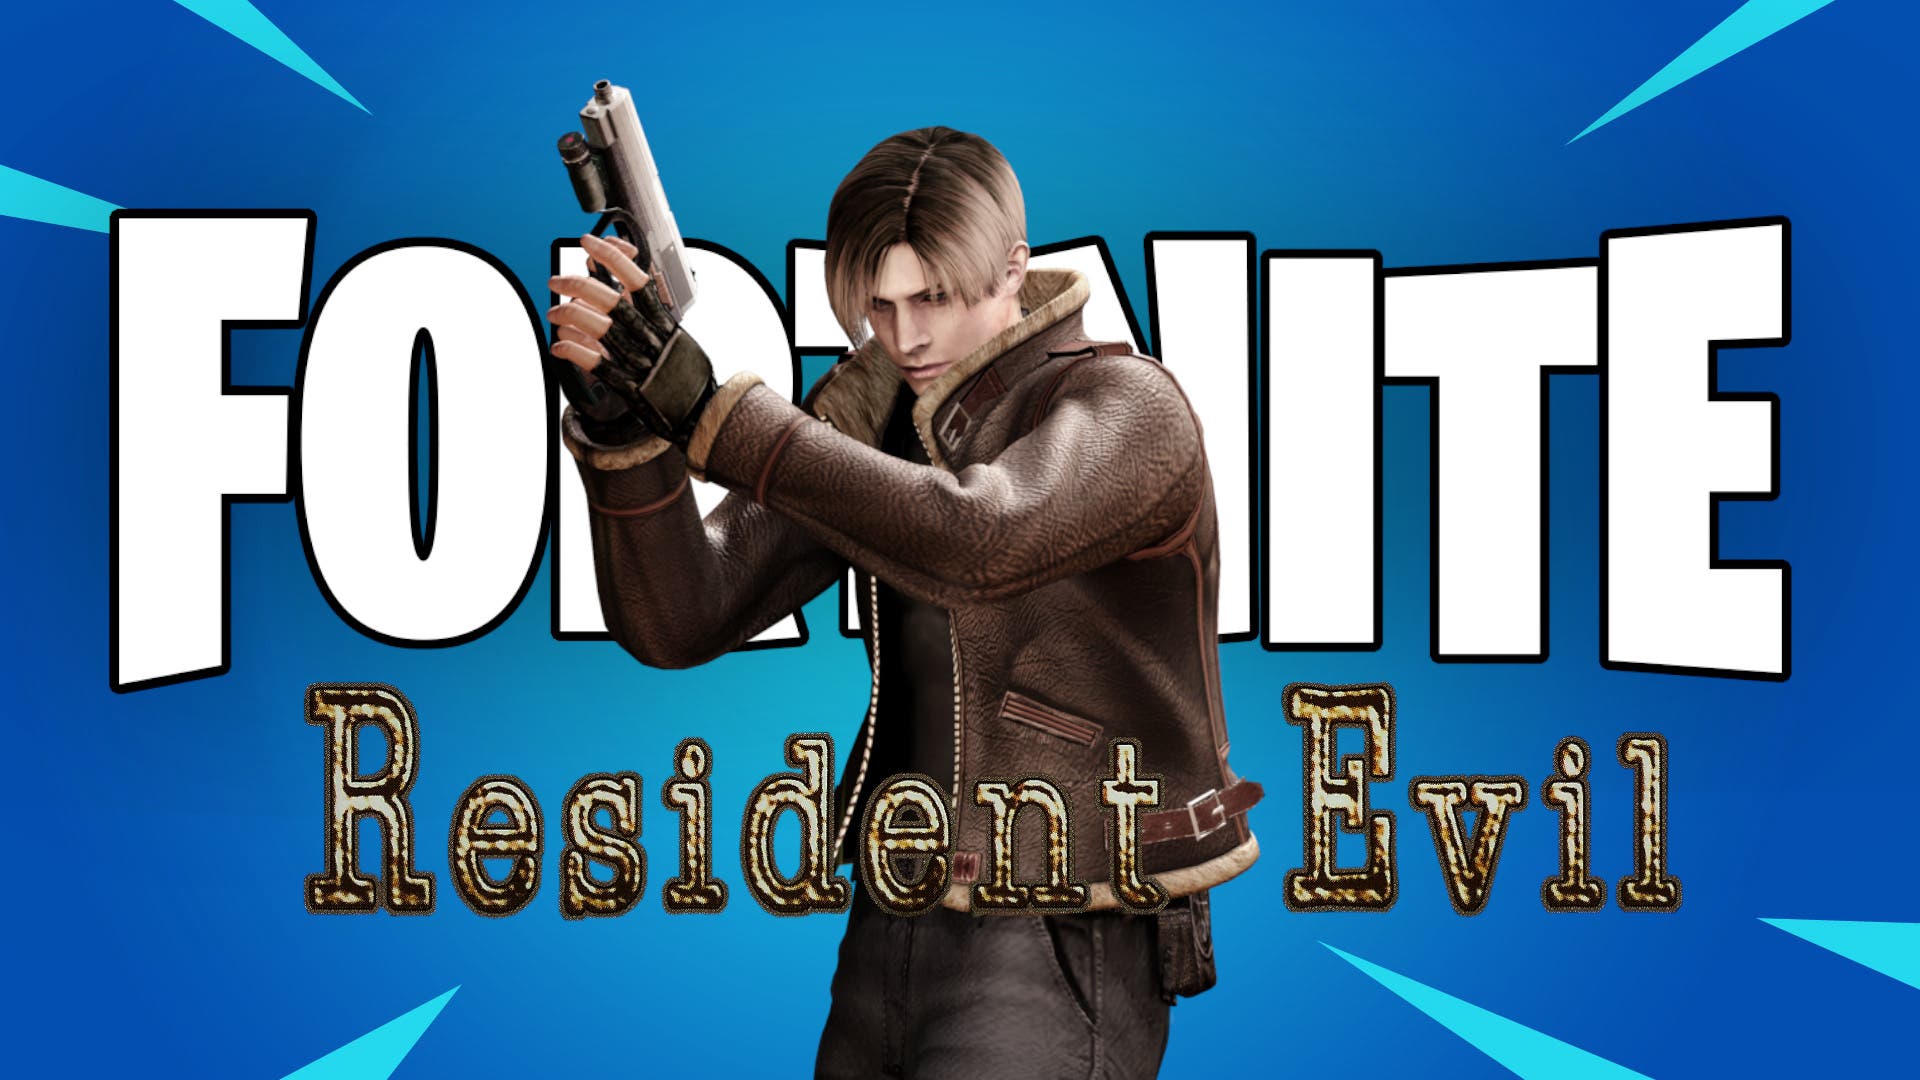 Fortnite filters another crossover from season 2: Resident Evil would return to the battle royale